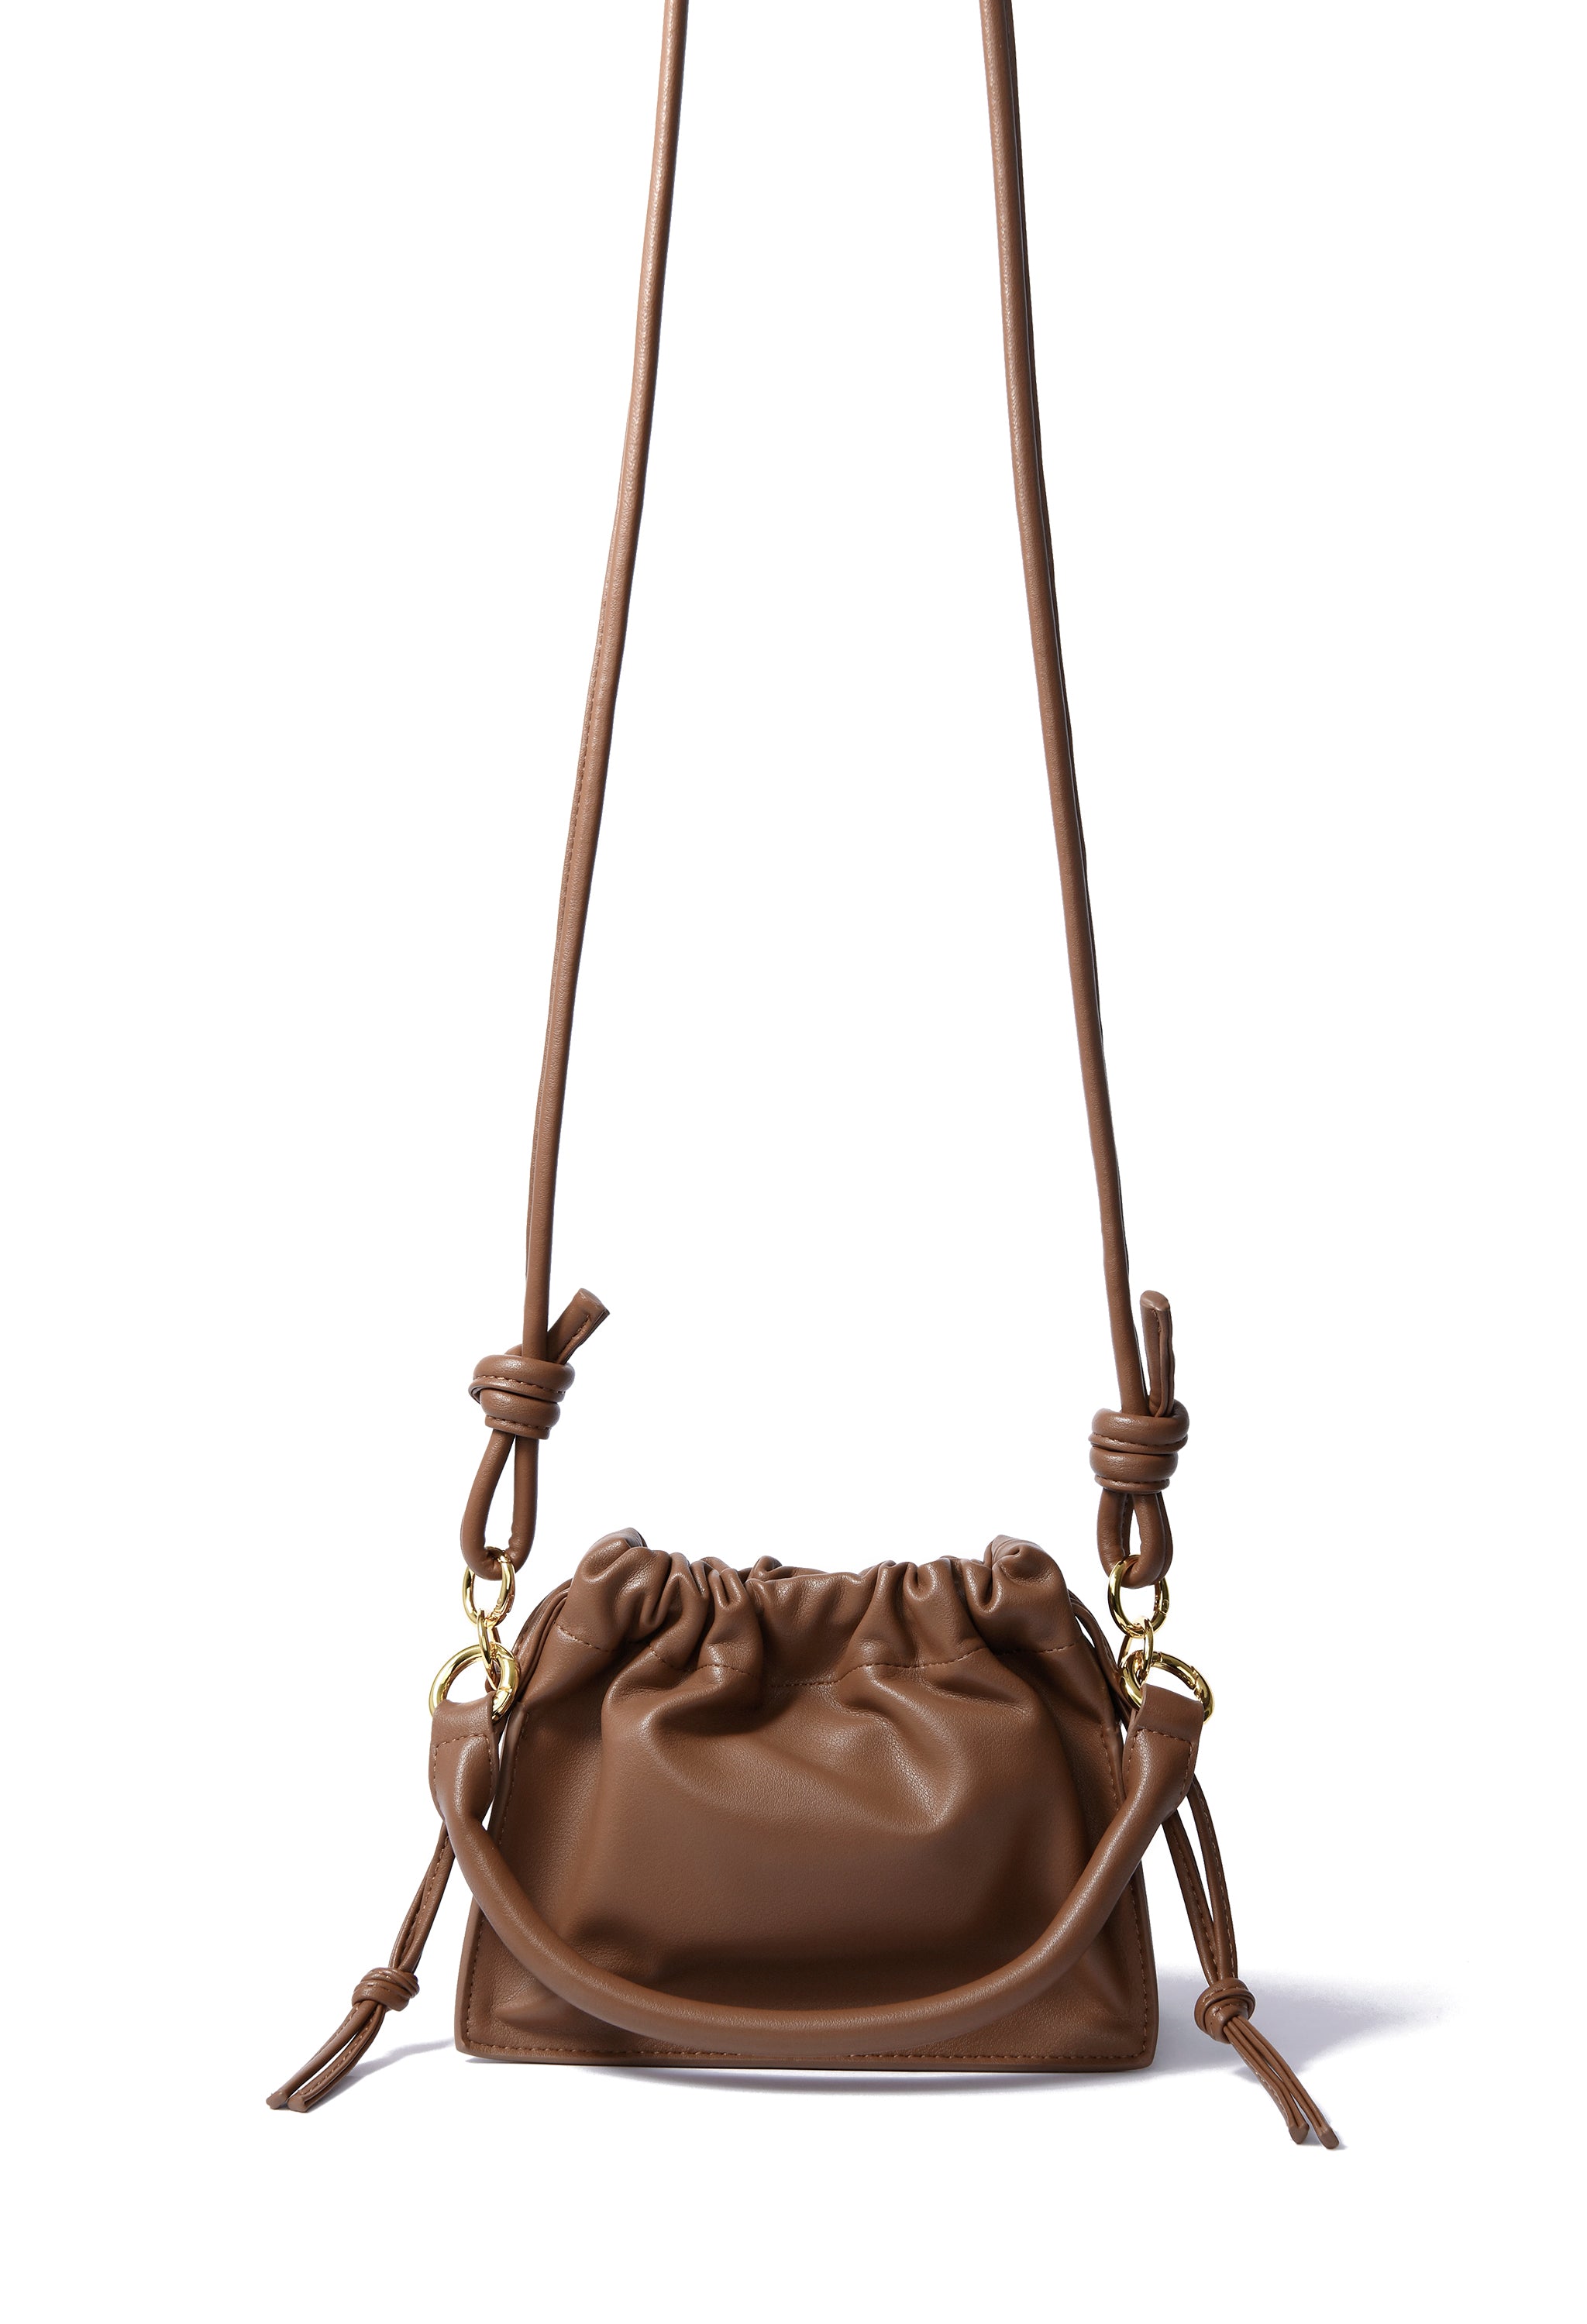 Riley Bag in smooth leather, Caramel BOB ORE blue collection on sale 2022 3